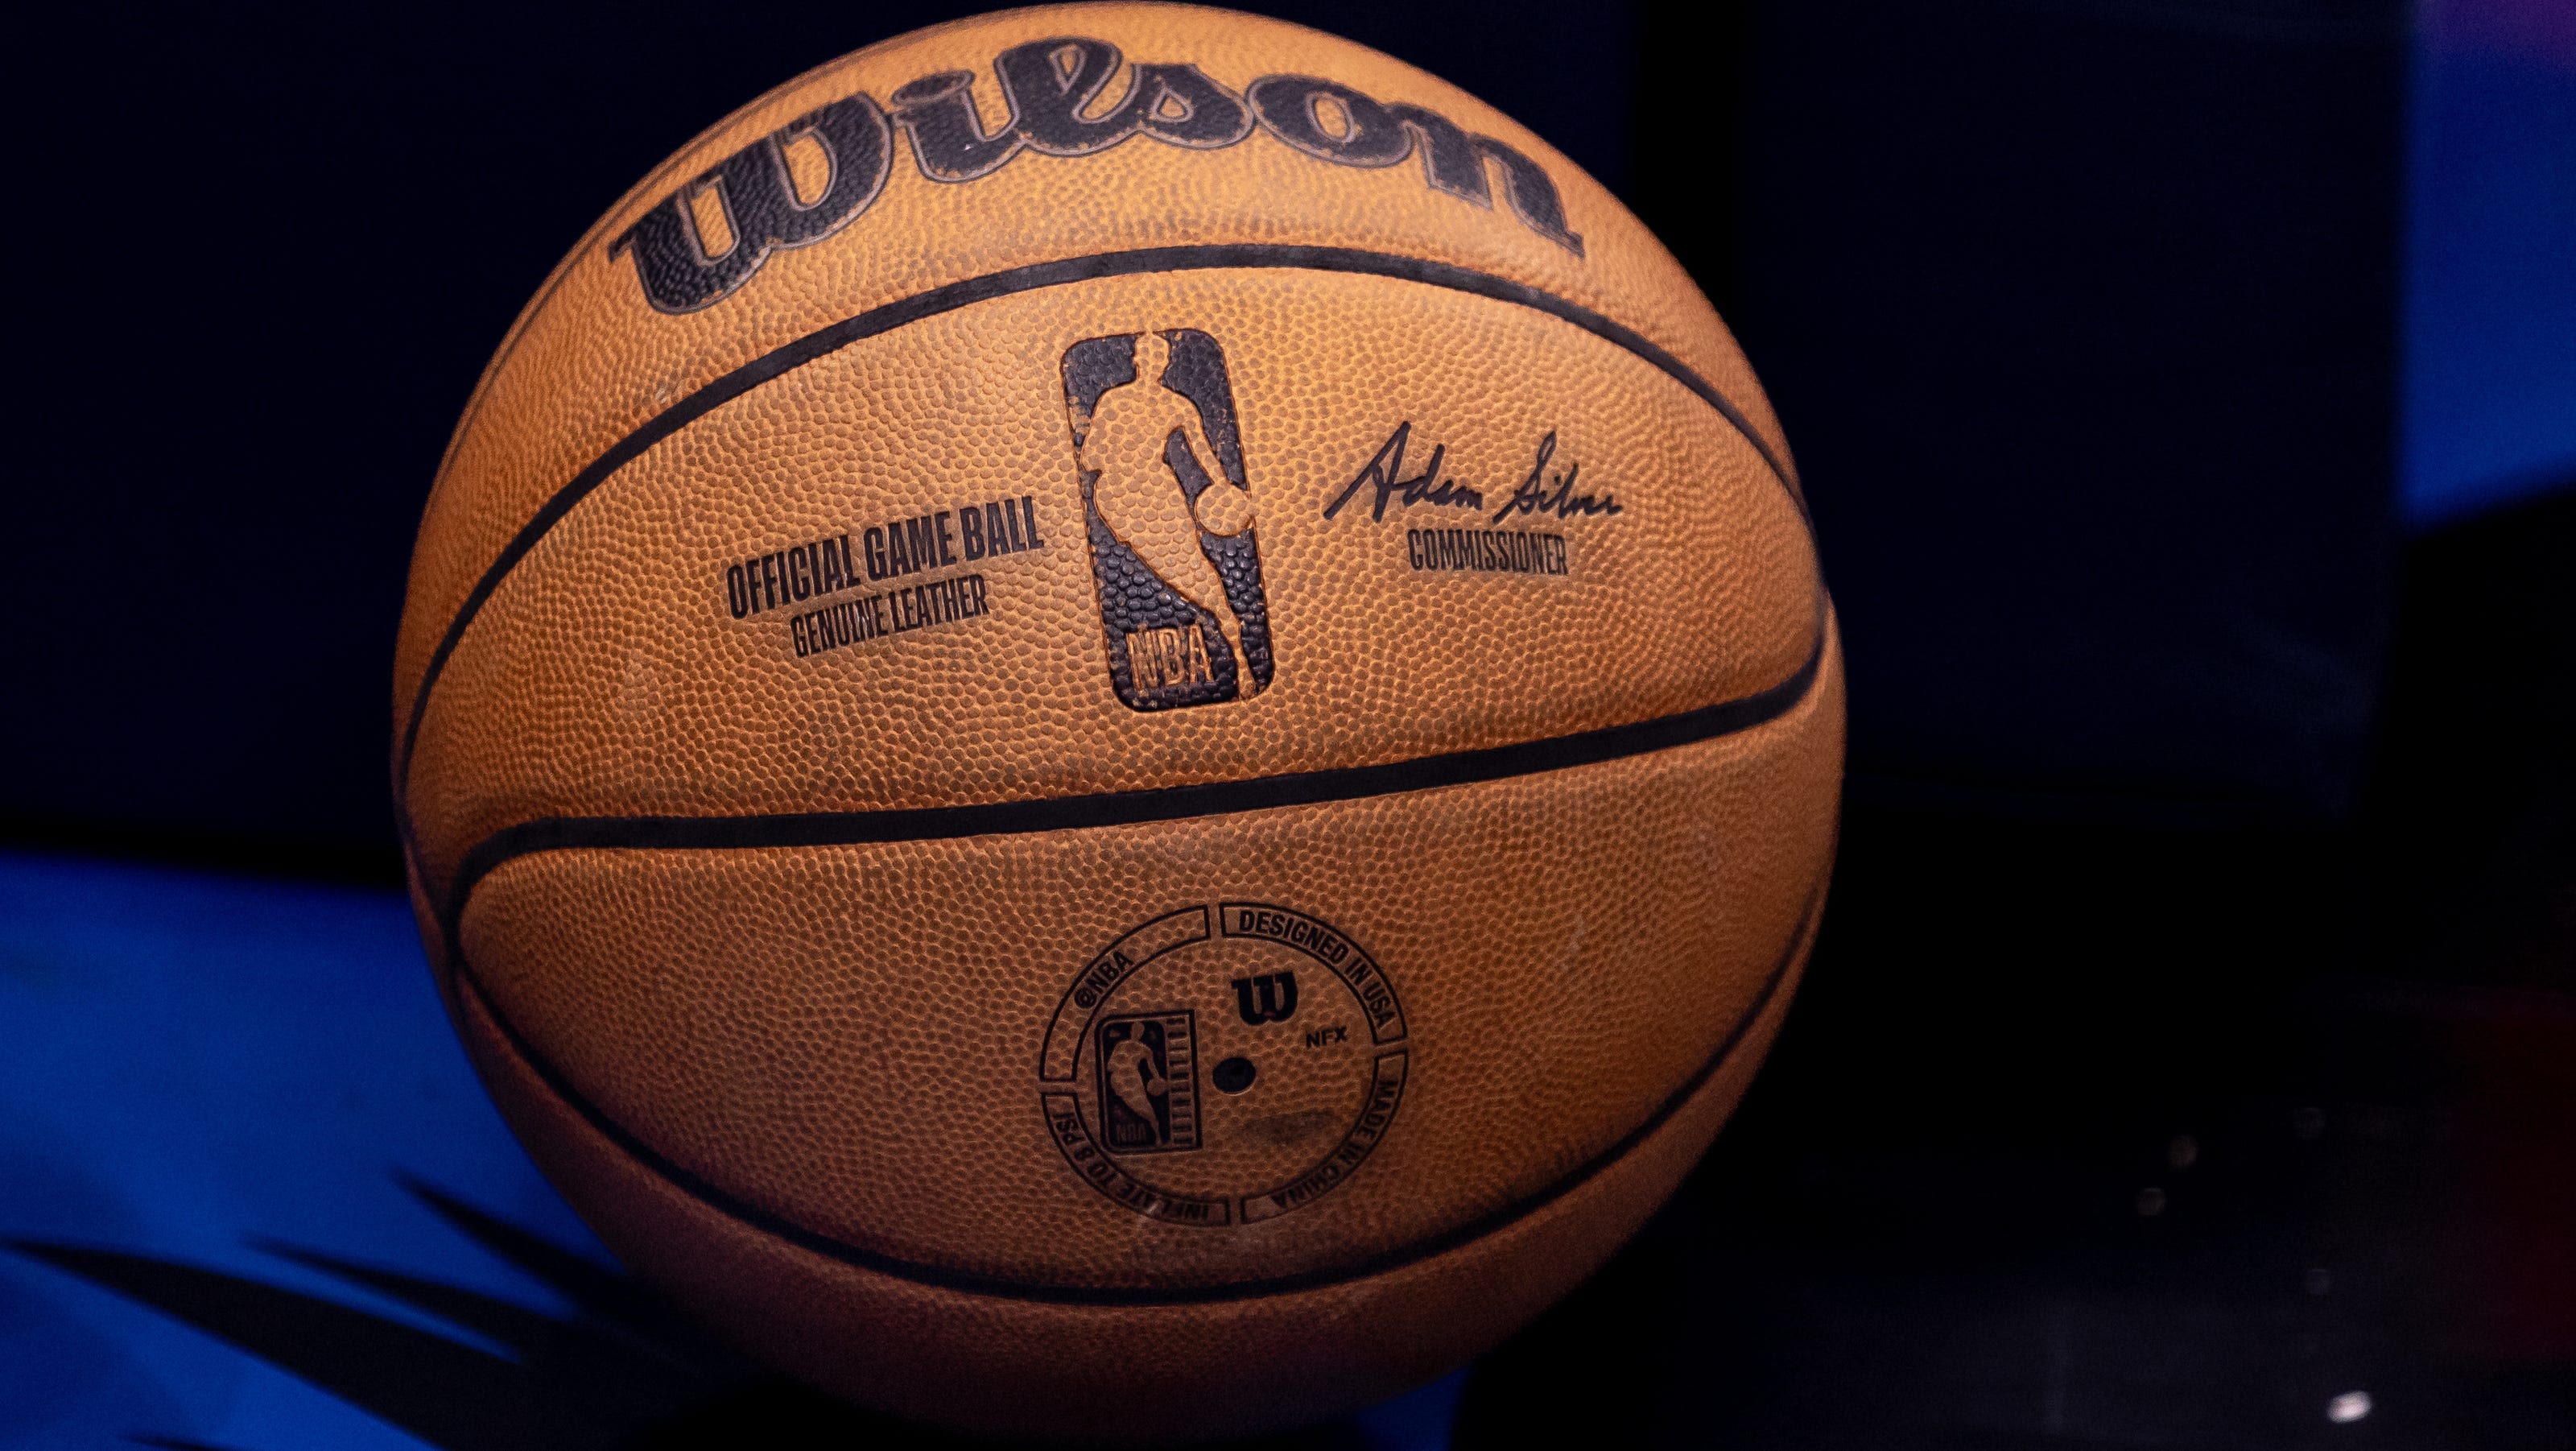 NBA media rights deal finalized with ESPN, Amazon, NBC. What to know about megadeal